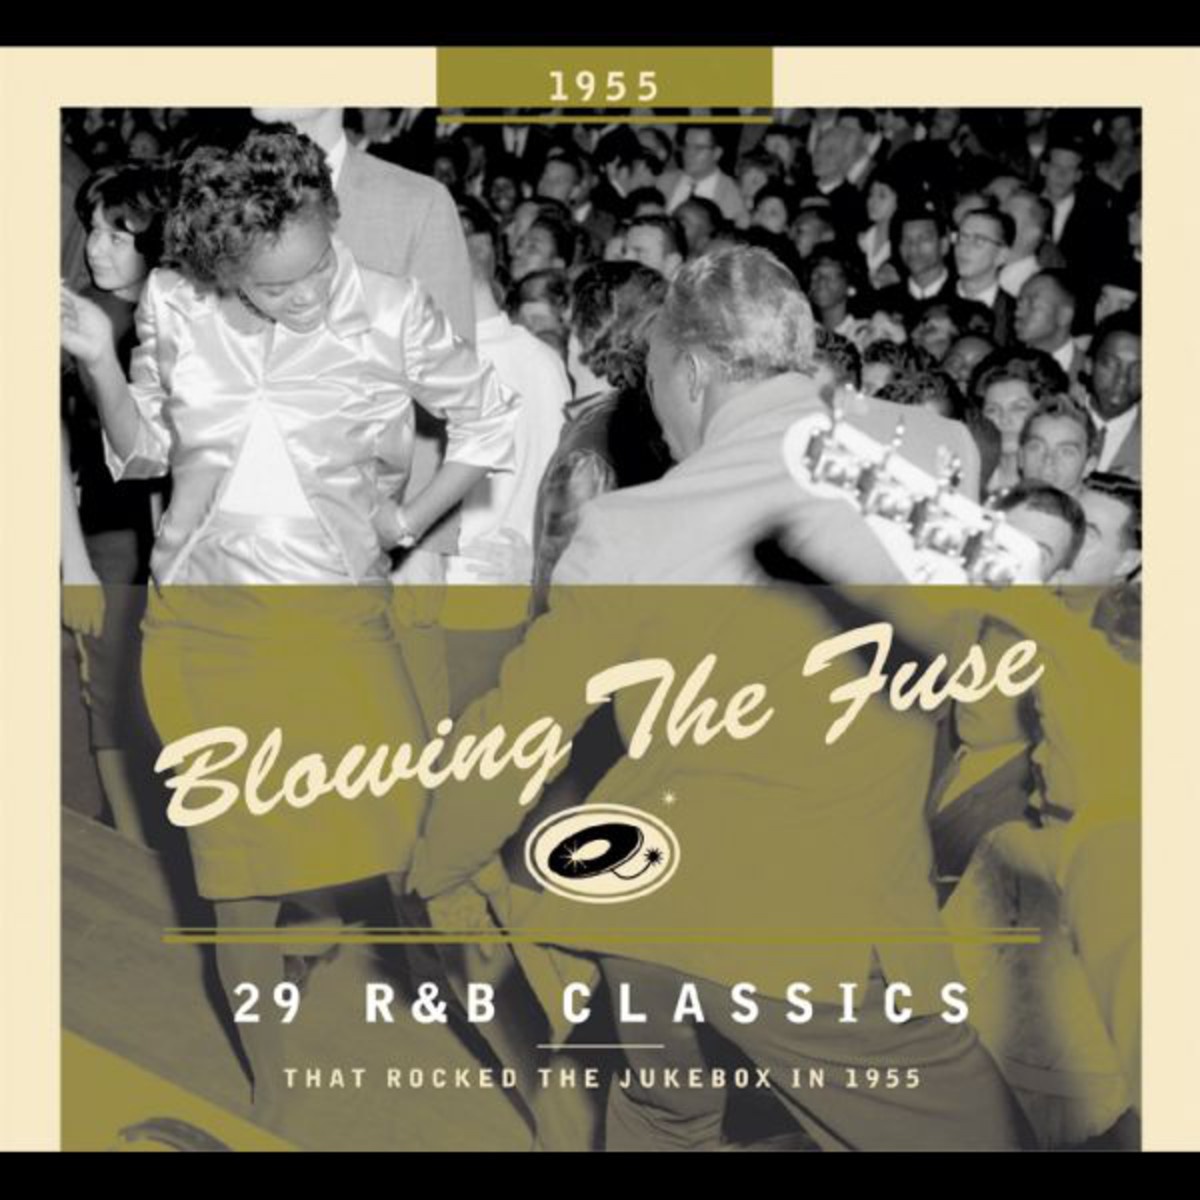 Blowing The Fuse - 29 R&B Classics That Rocked The Jukebox In 1955